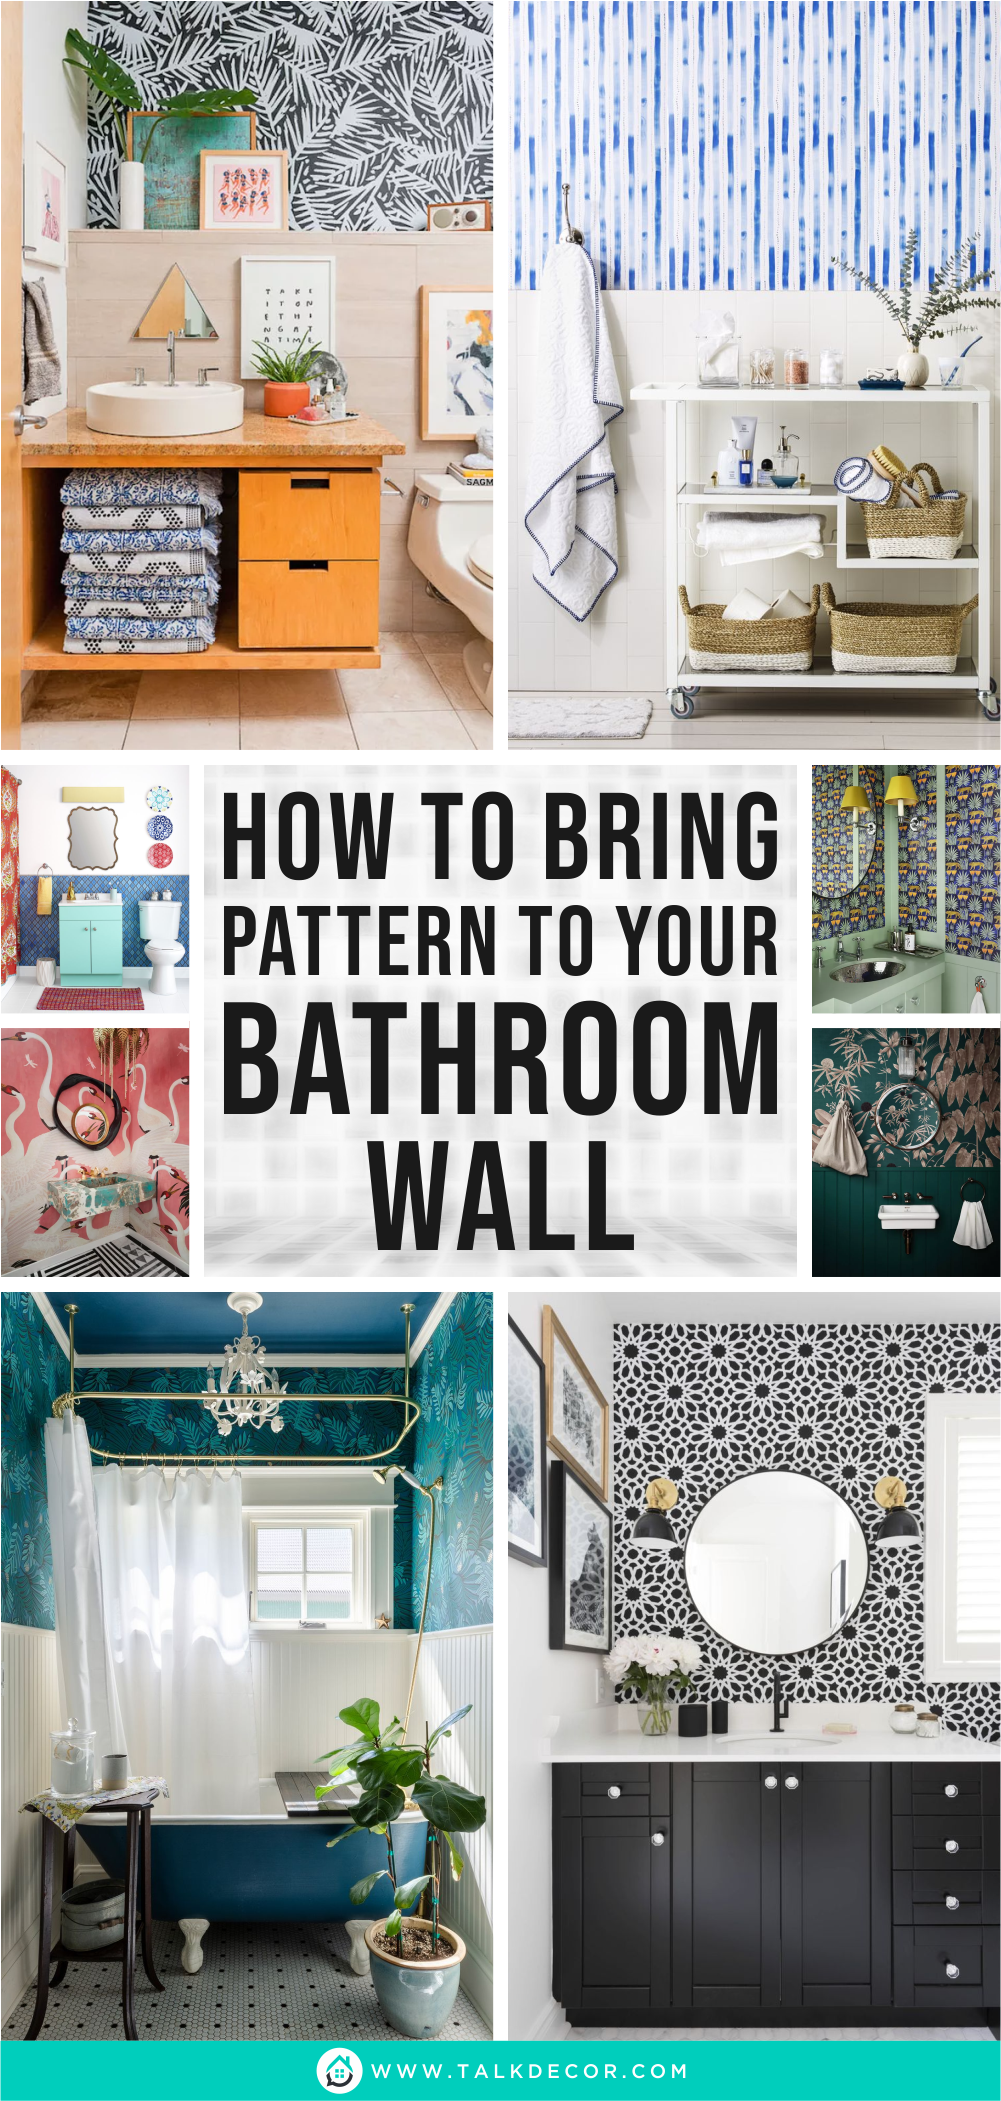 How to Bring Pattern to Your Bathroom Wall - Talkdecor